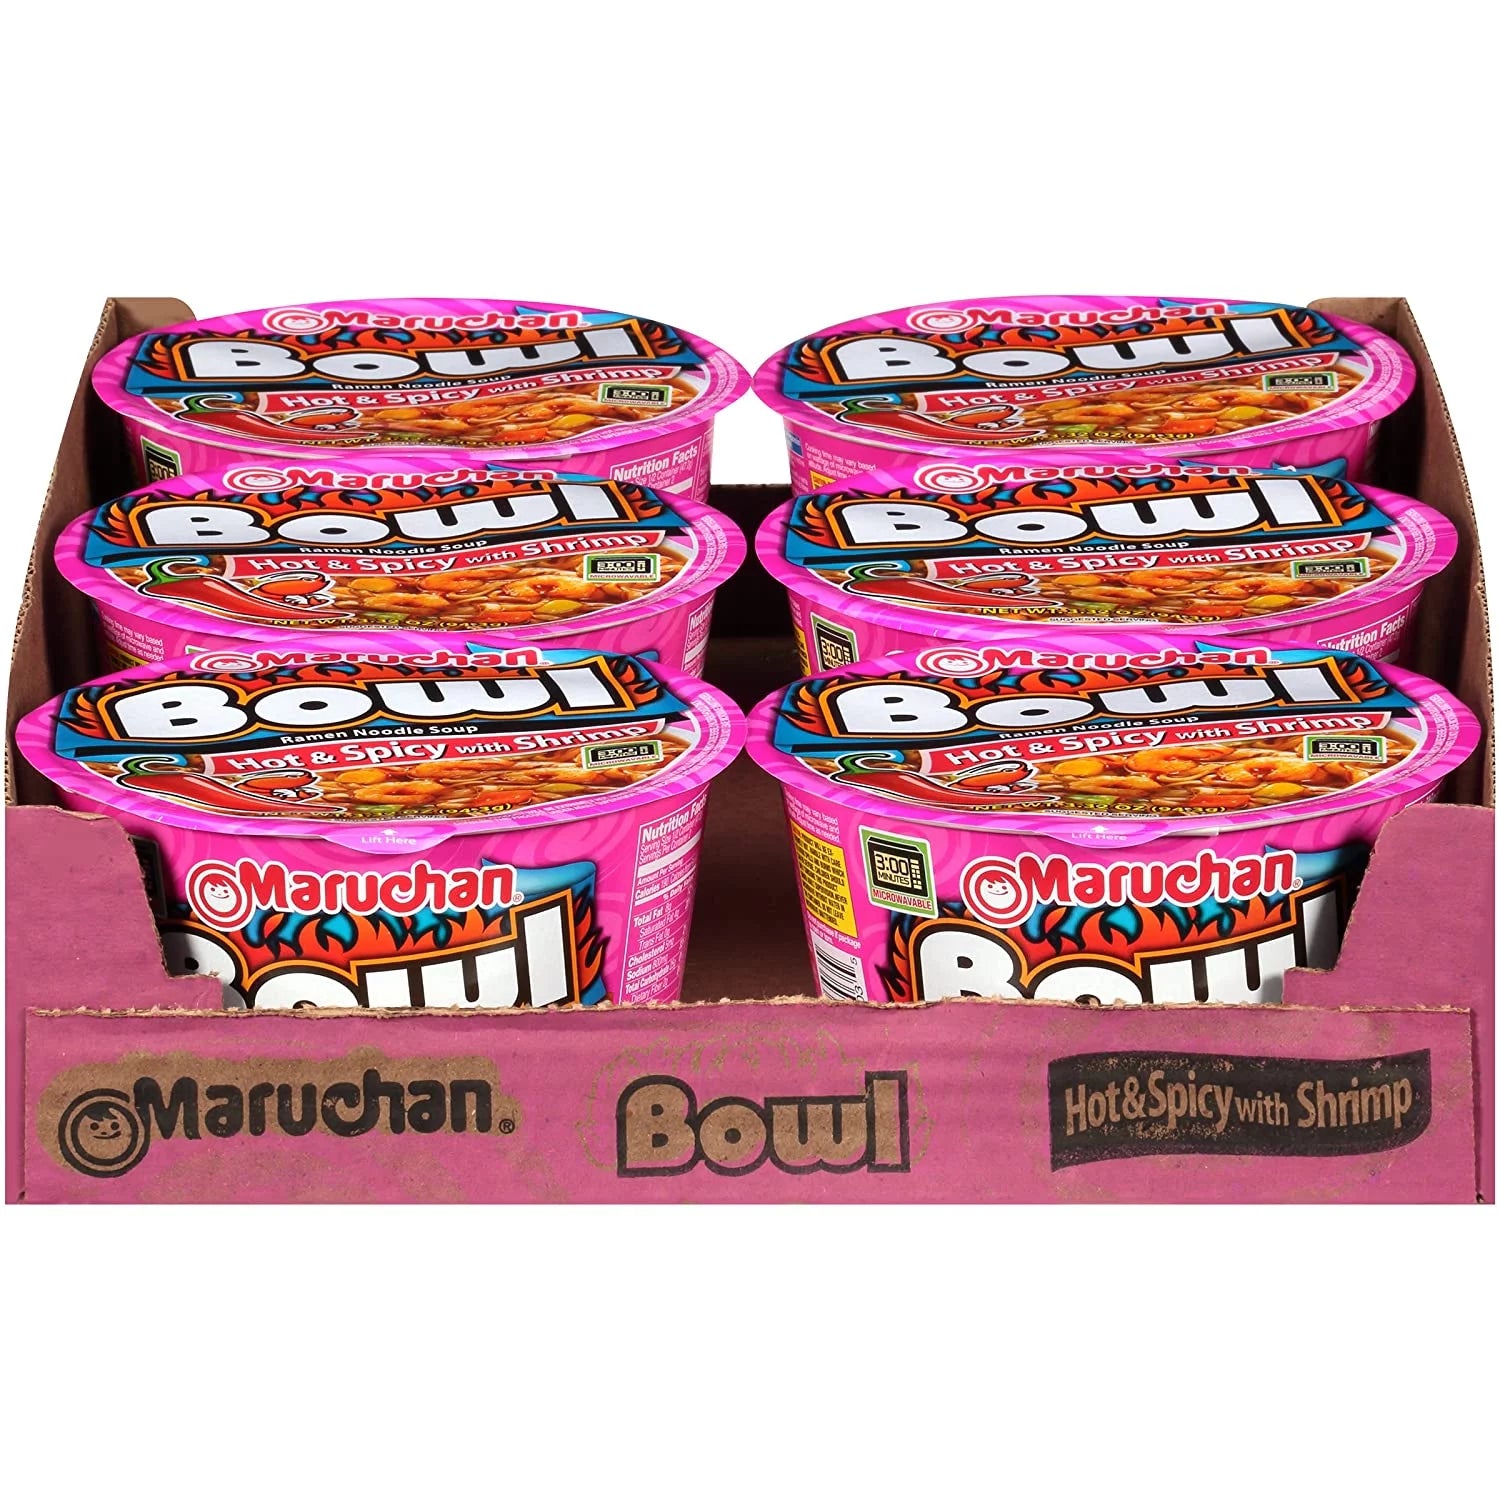 Maruchan Bowl Hot & Spicy With Shrimp Flavor 3.31oz (Pack of 6)